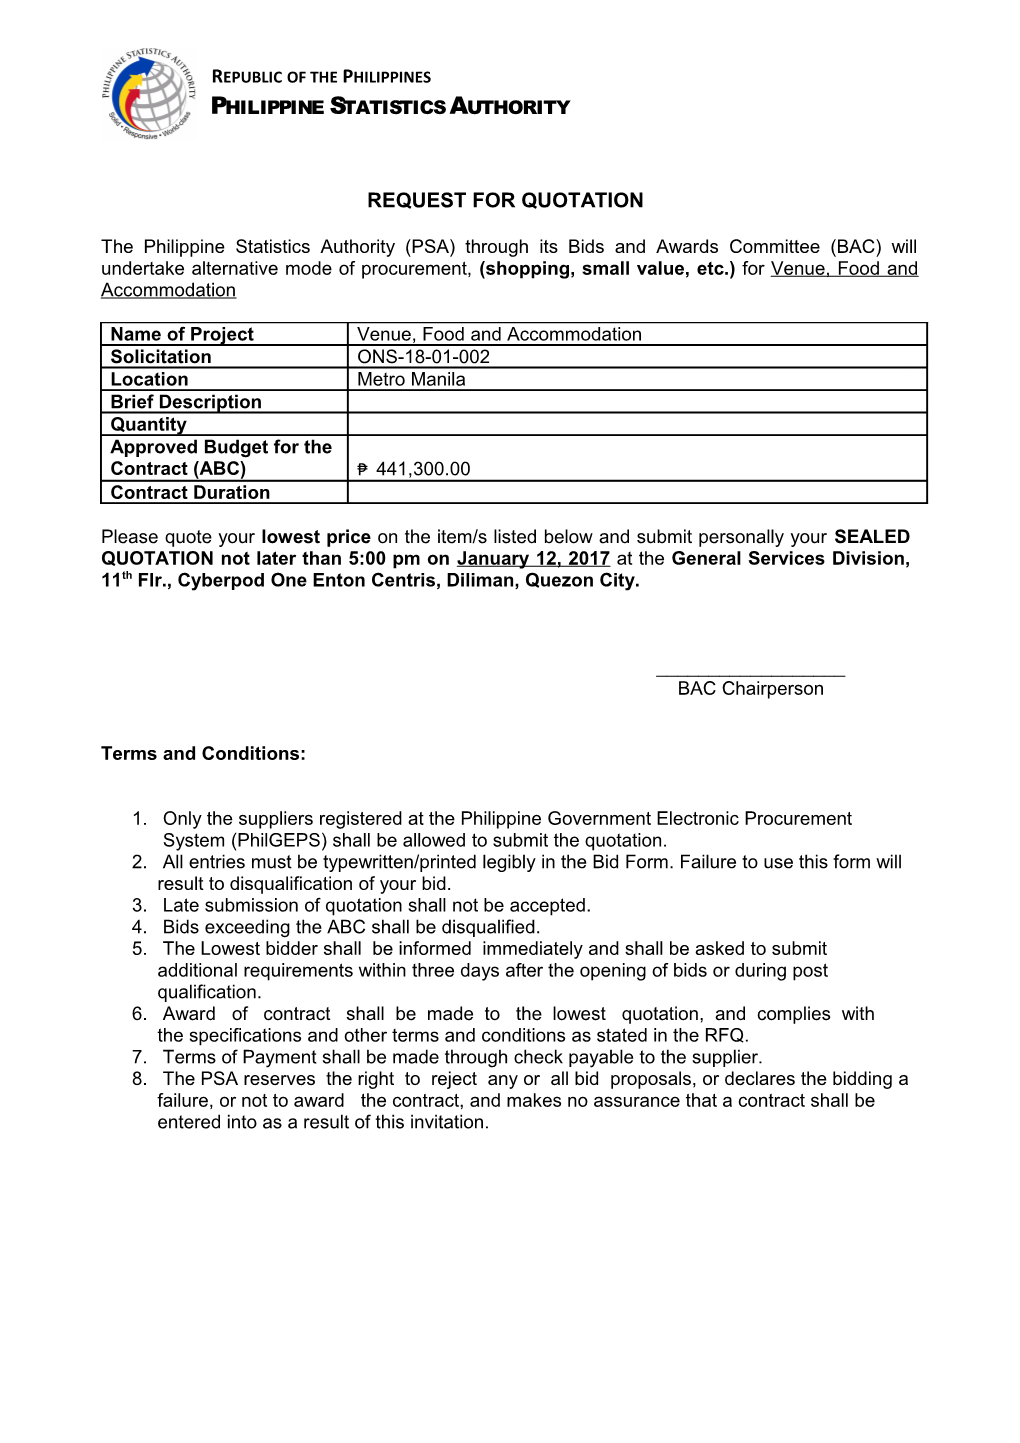 Request for Quotation s48